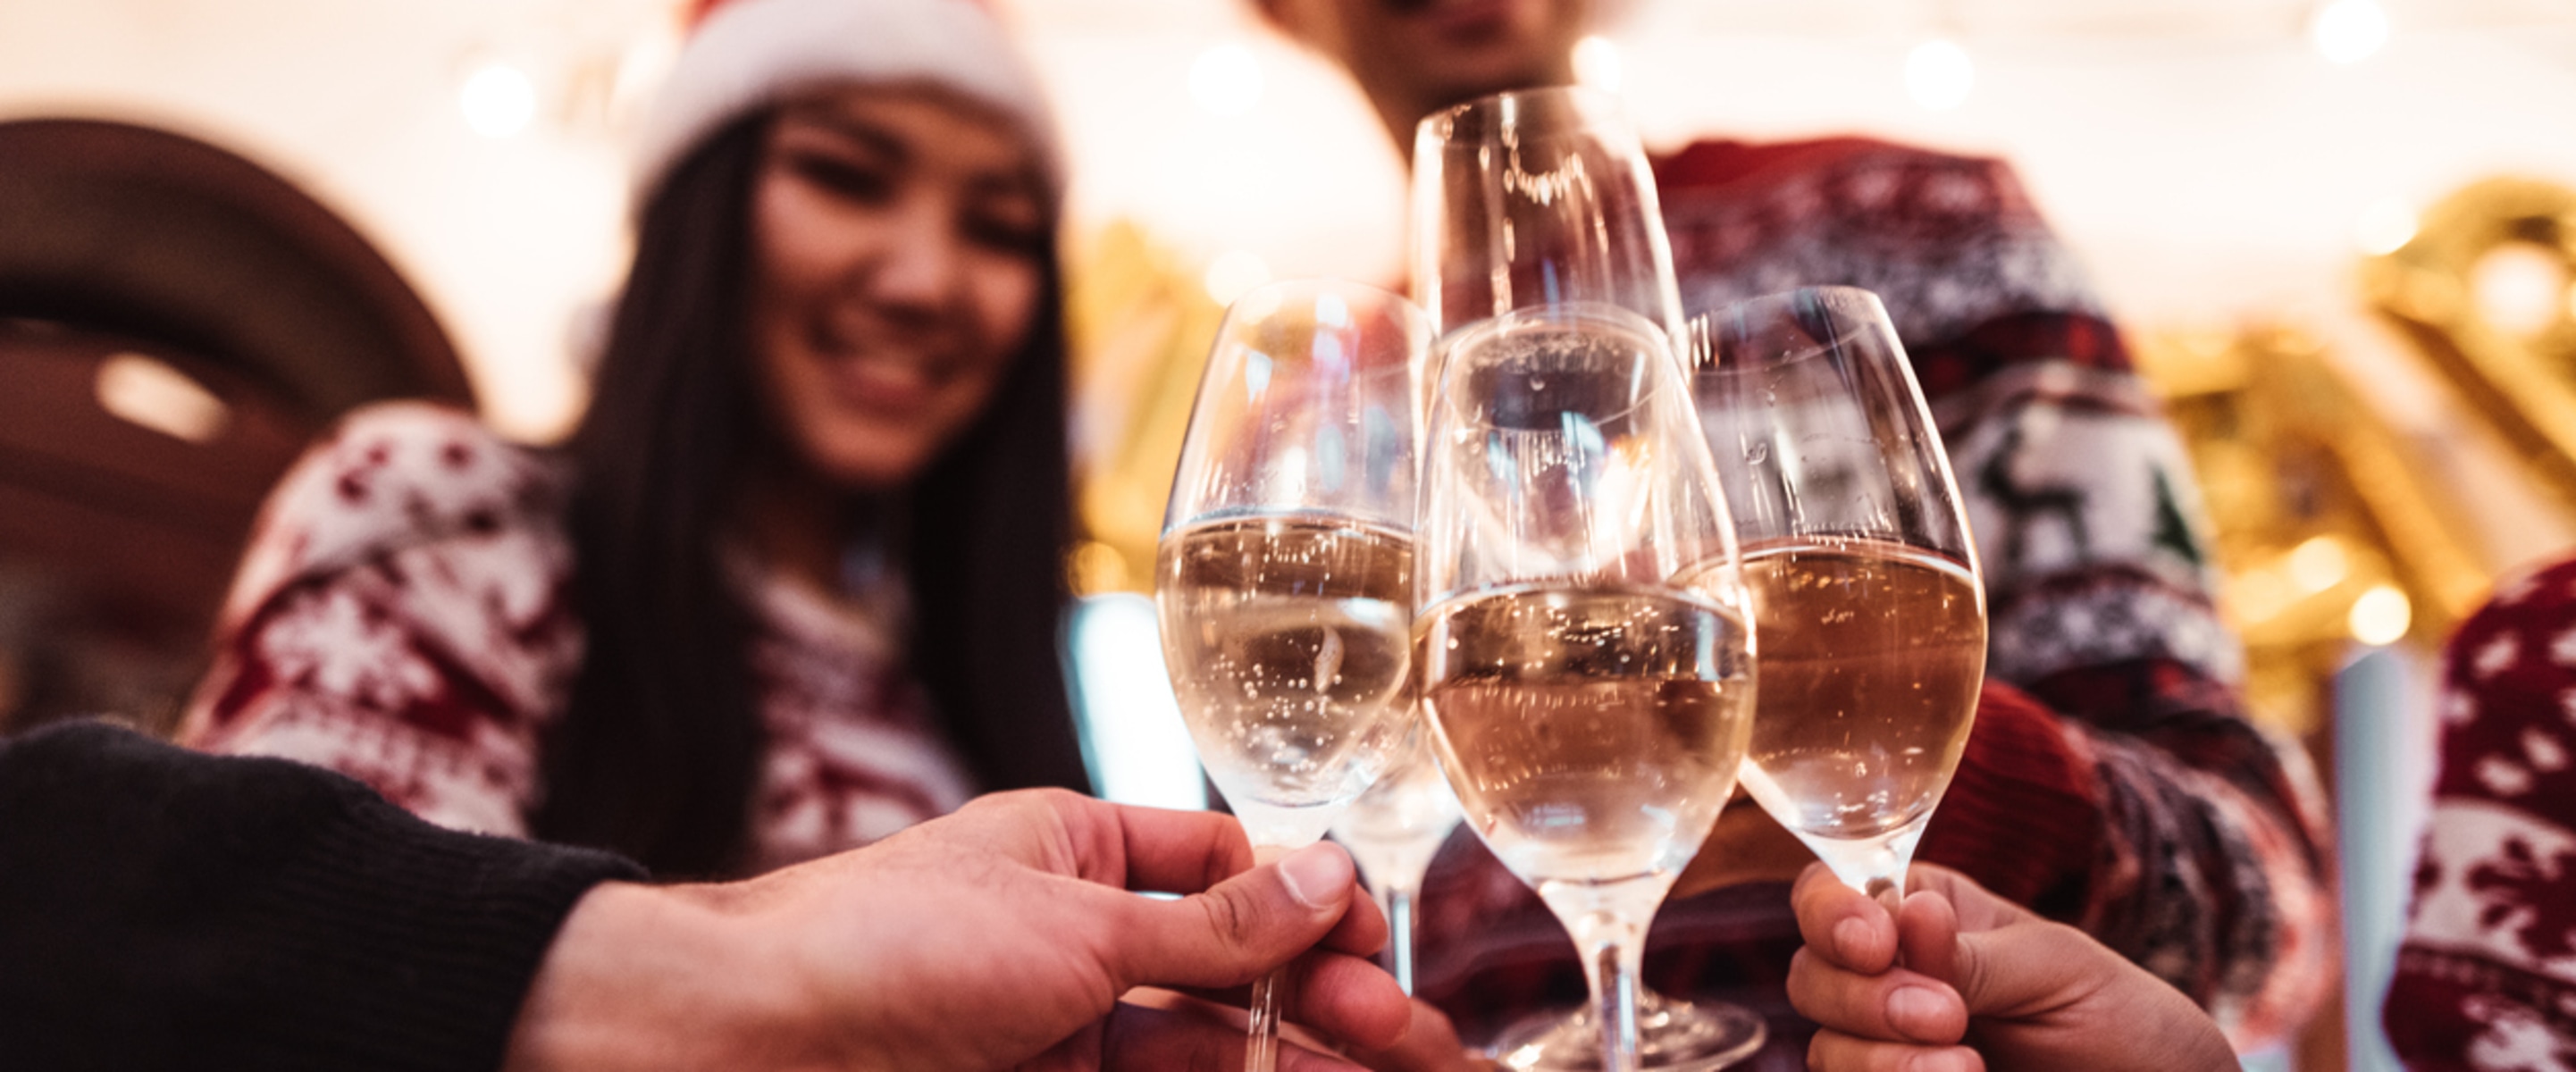 Vegan Champagne Brands, Sparkling Wines, and the Best Cocktails for the Holidays